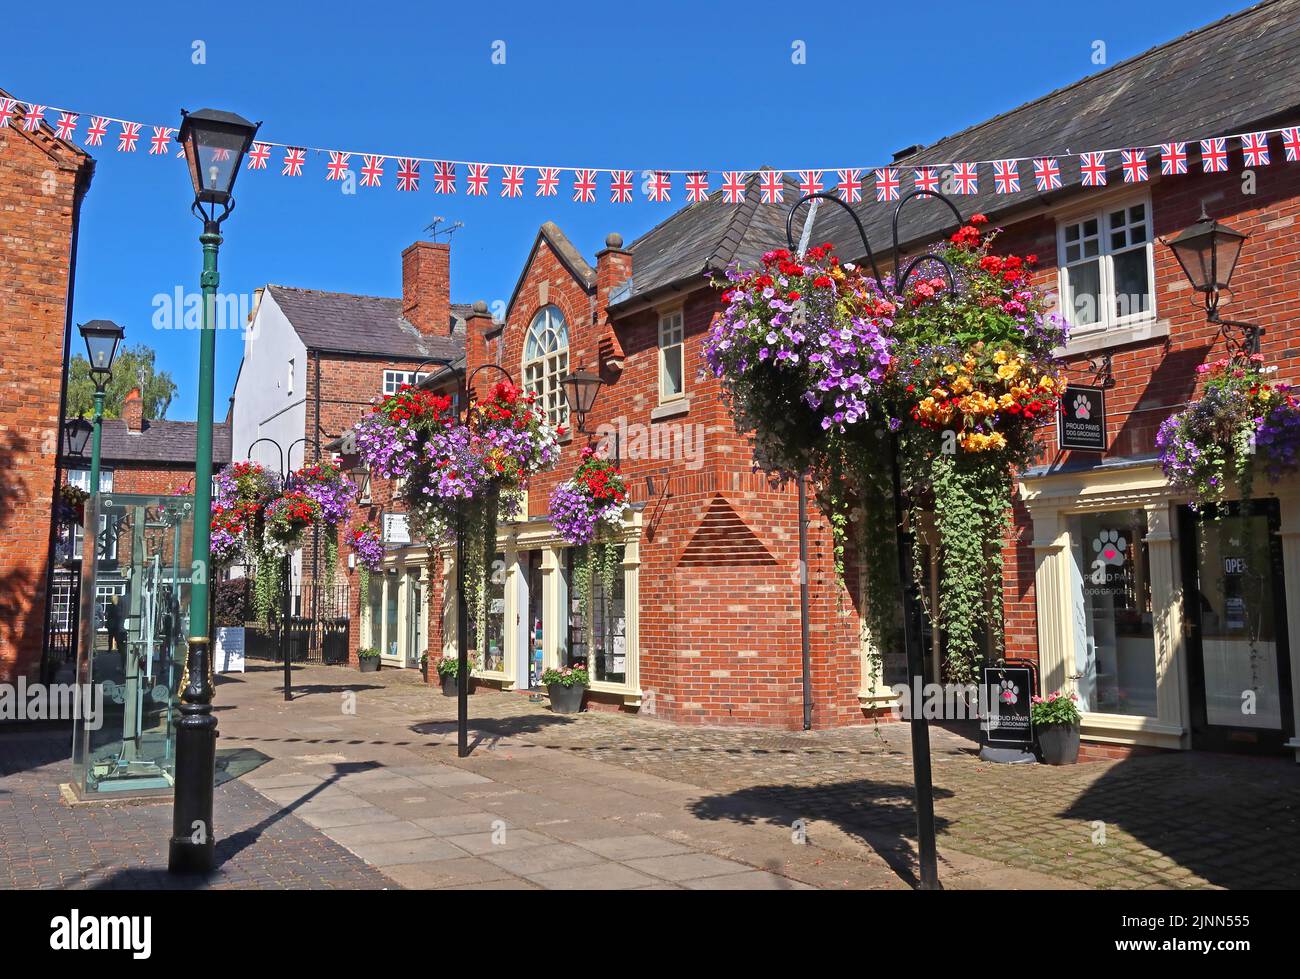 The Cocoa Yard, & Cocoa House, Pillory Street, Nantwich, Cheshire, England, UK, CW5 5BL Stock Photo